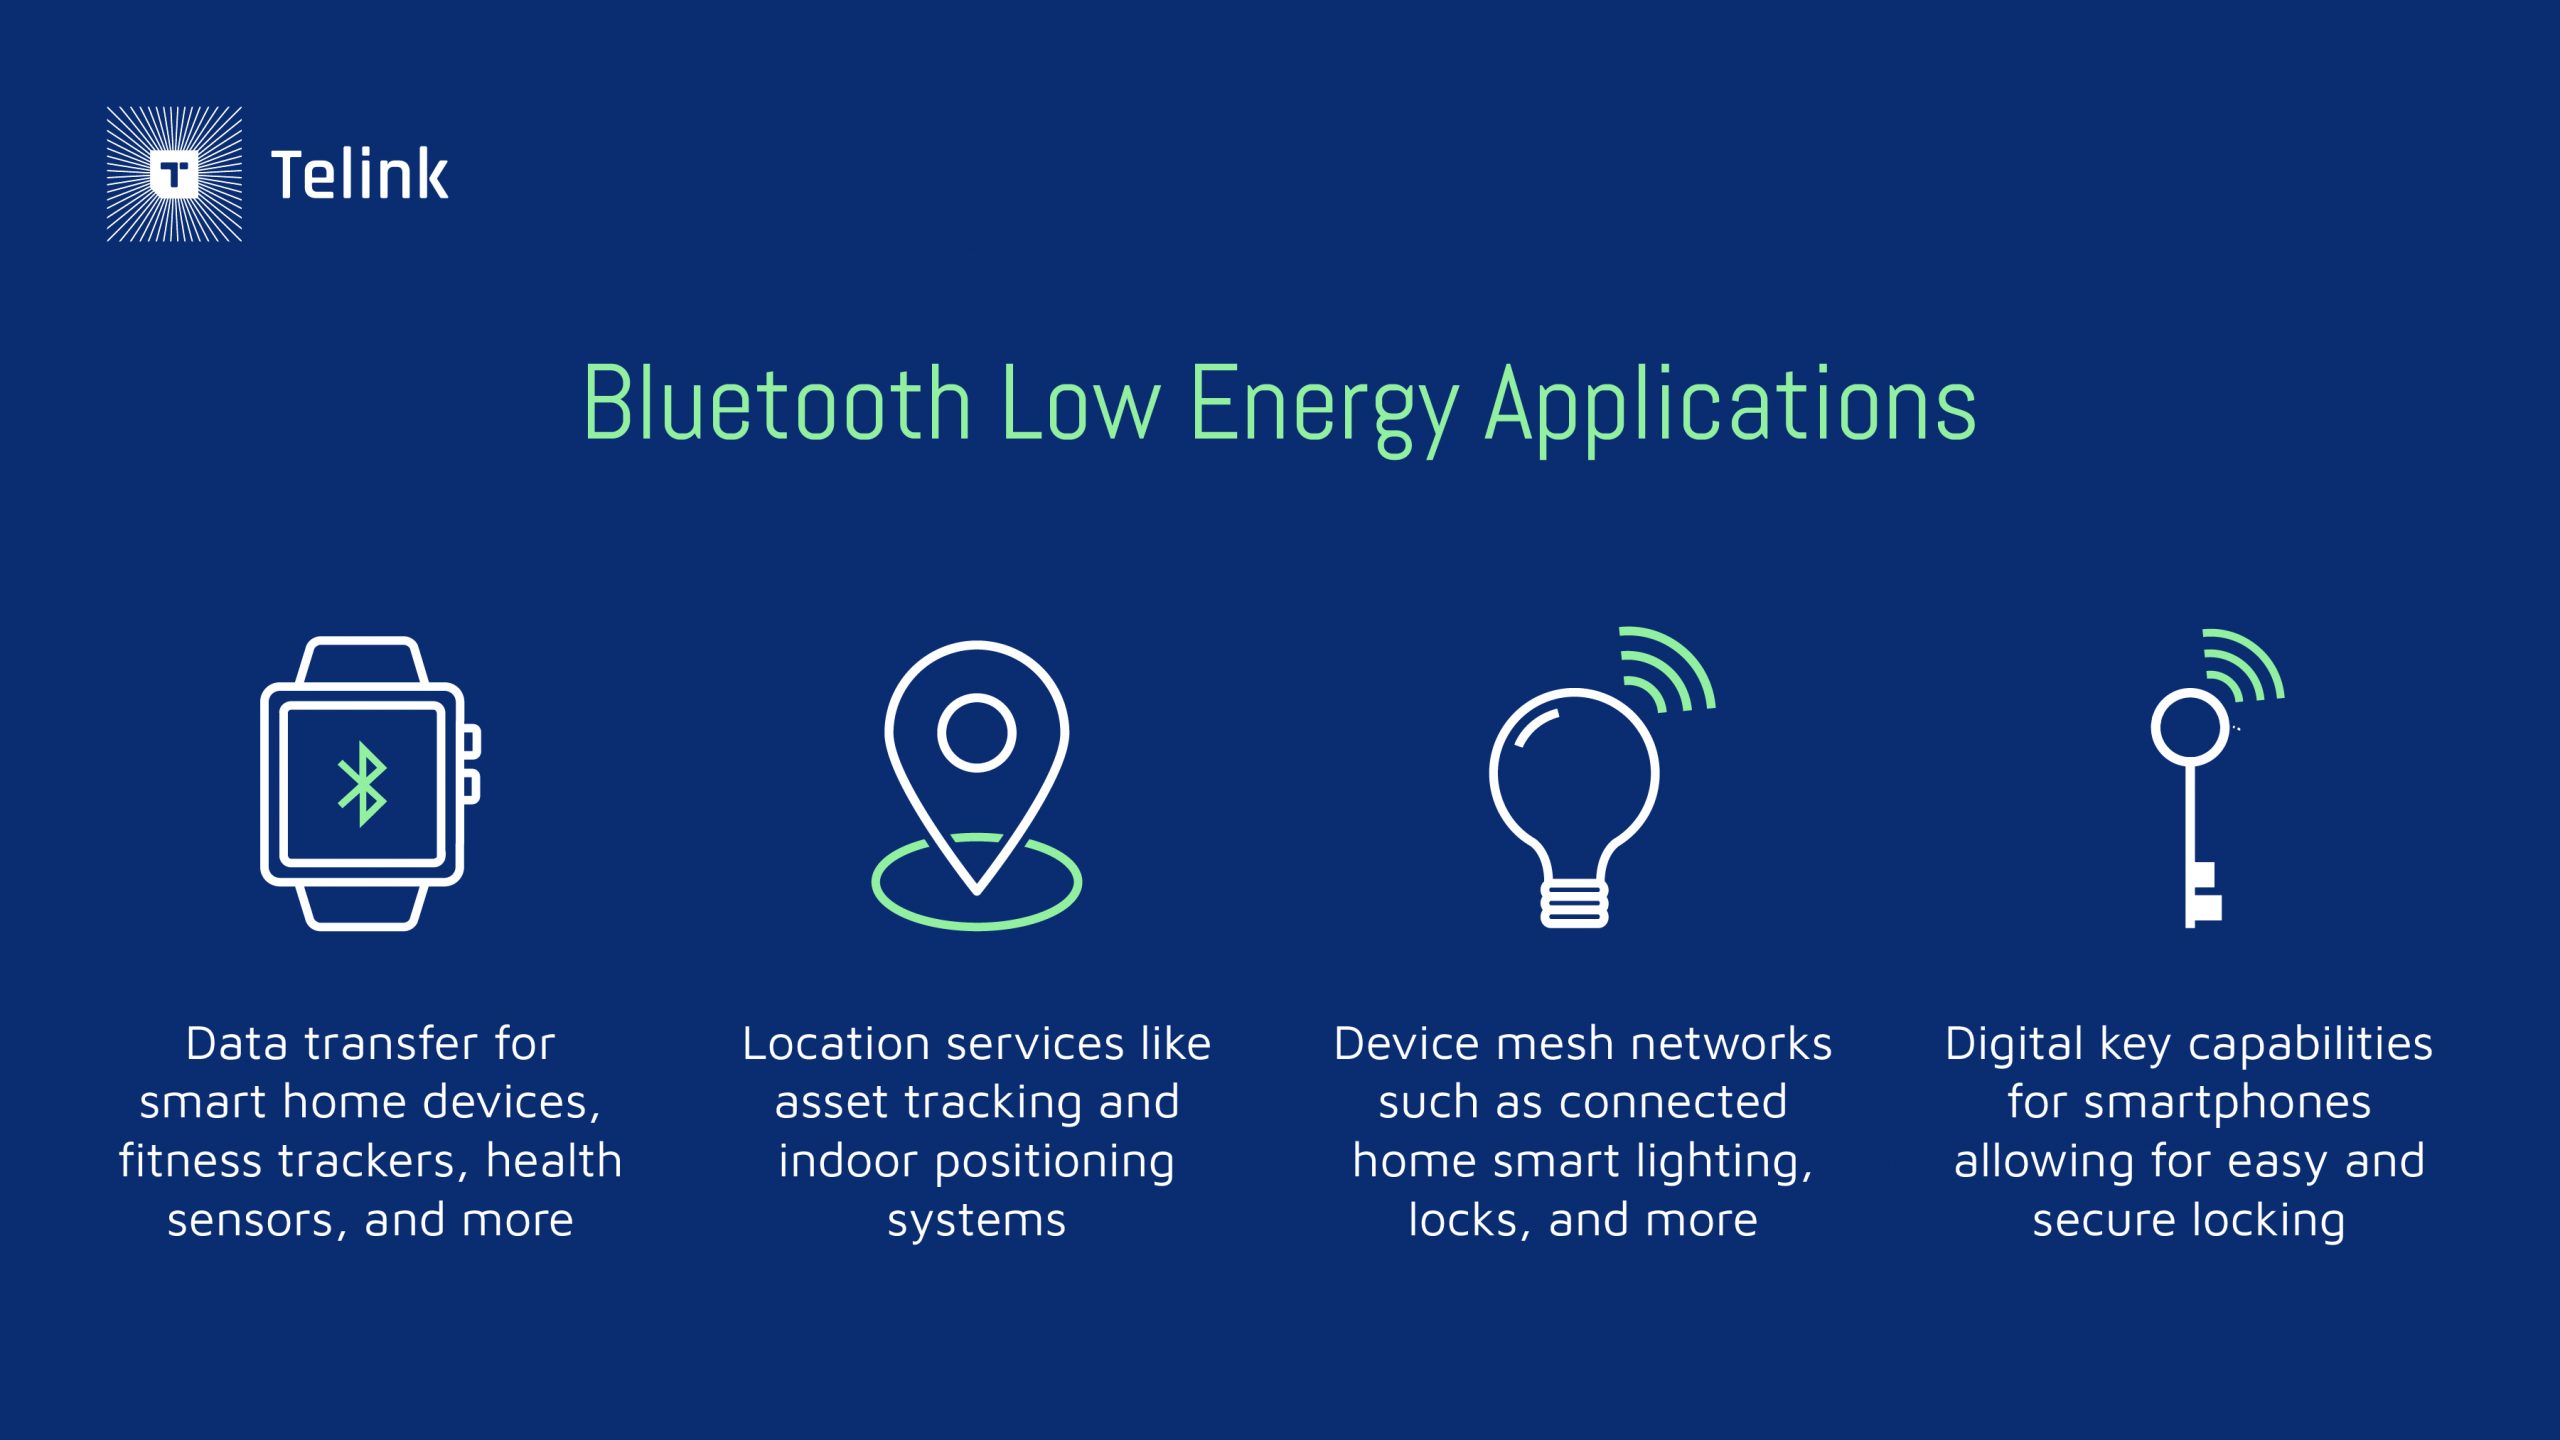 Bluetooth low energy applications